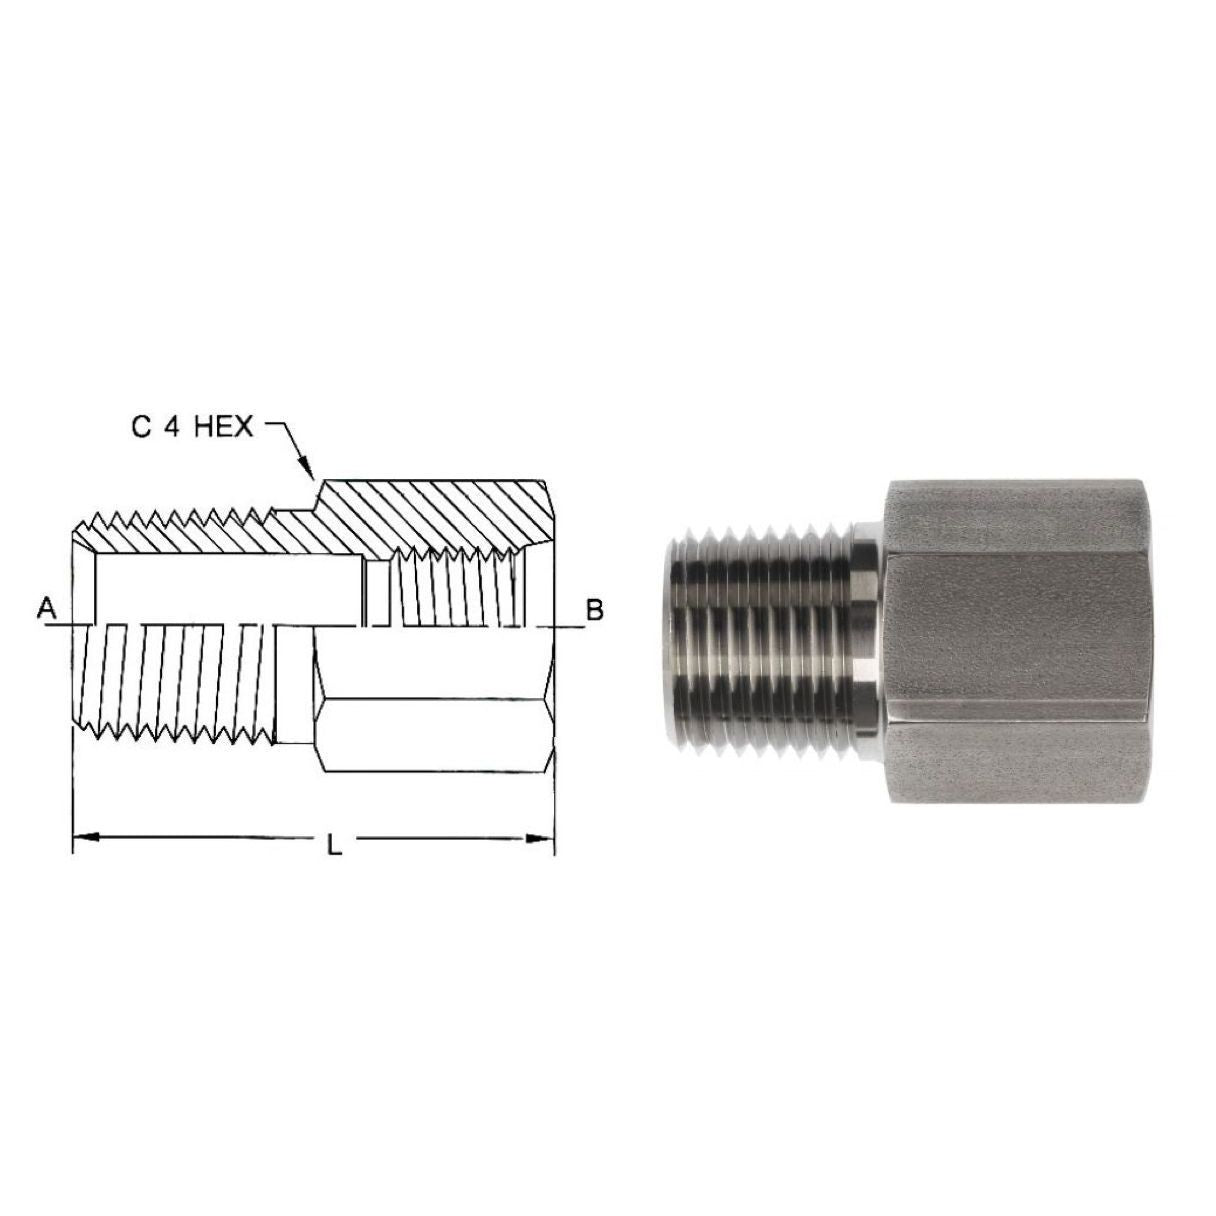 6404-08-12 : OneHydraulics Adapter, Straight, 0.5 (1/2") Female ORB x 0.75 (3/4") Male, Steel, 5000psi